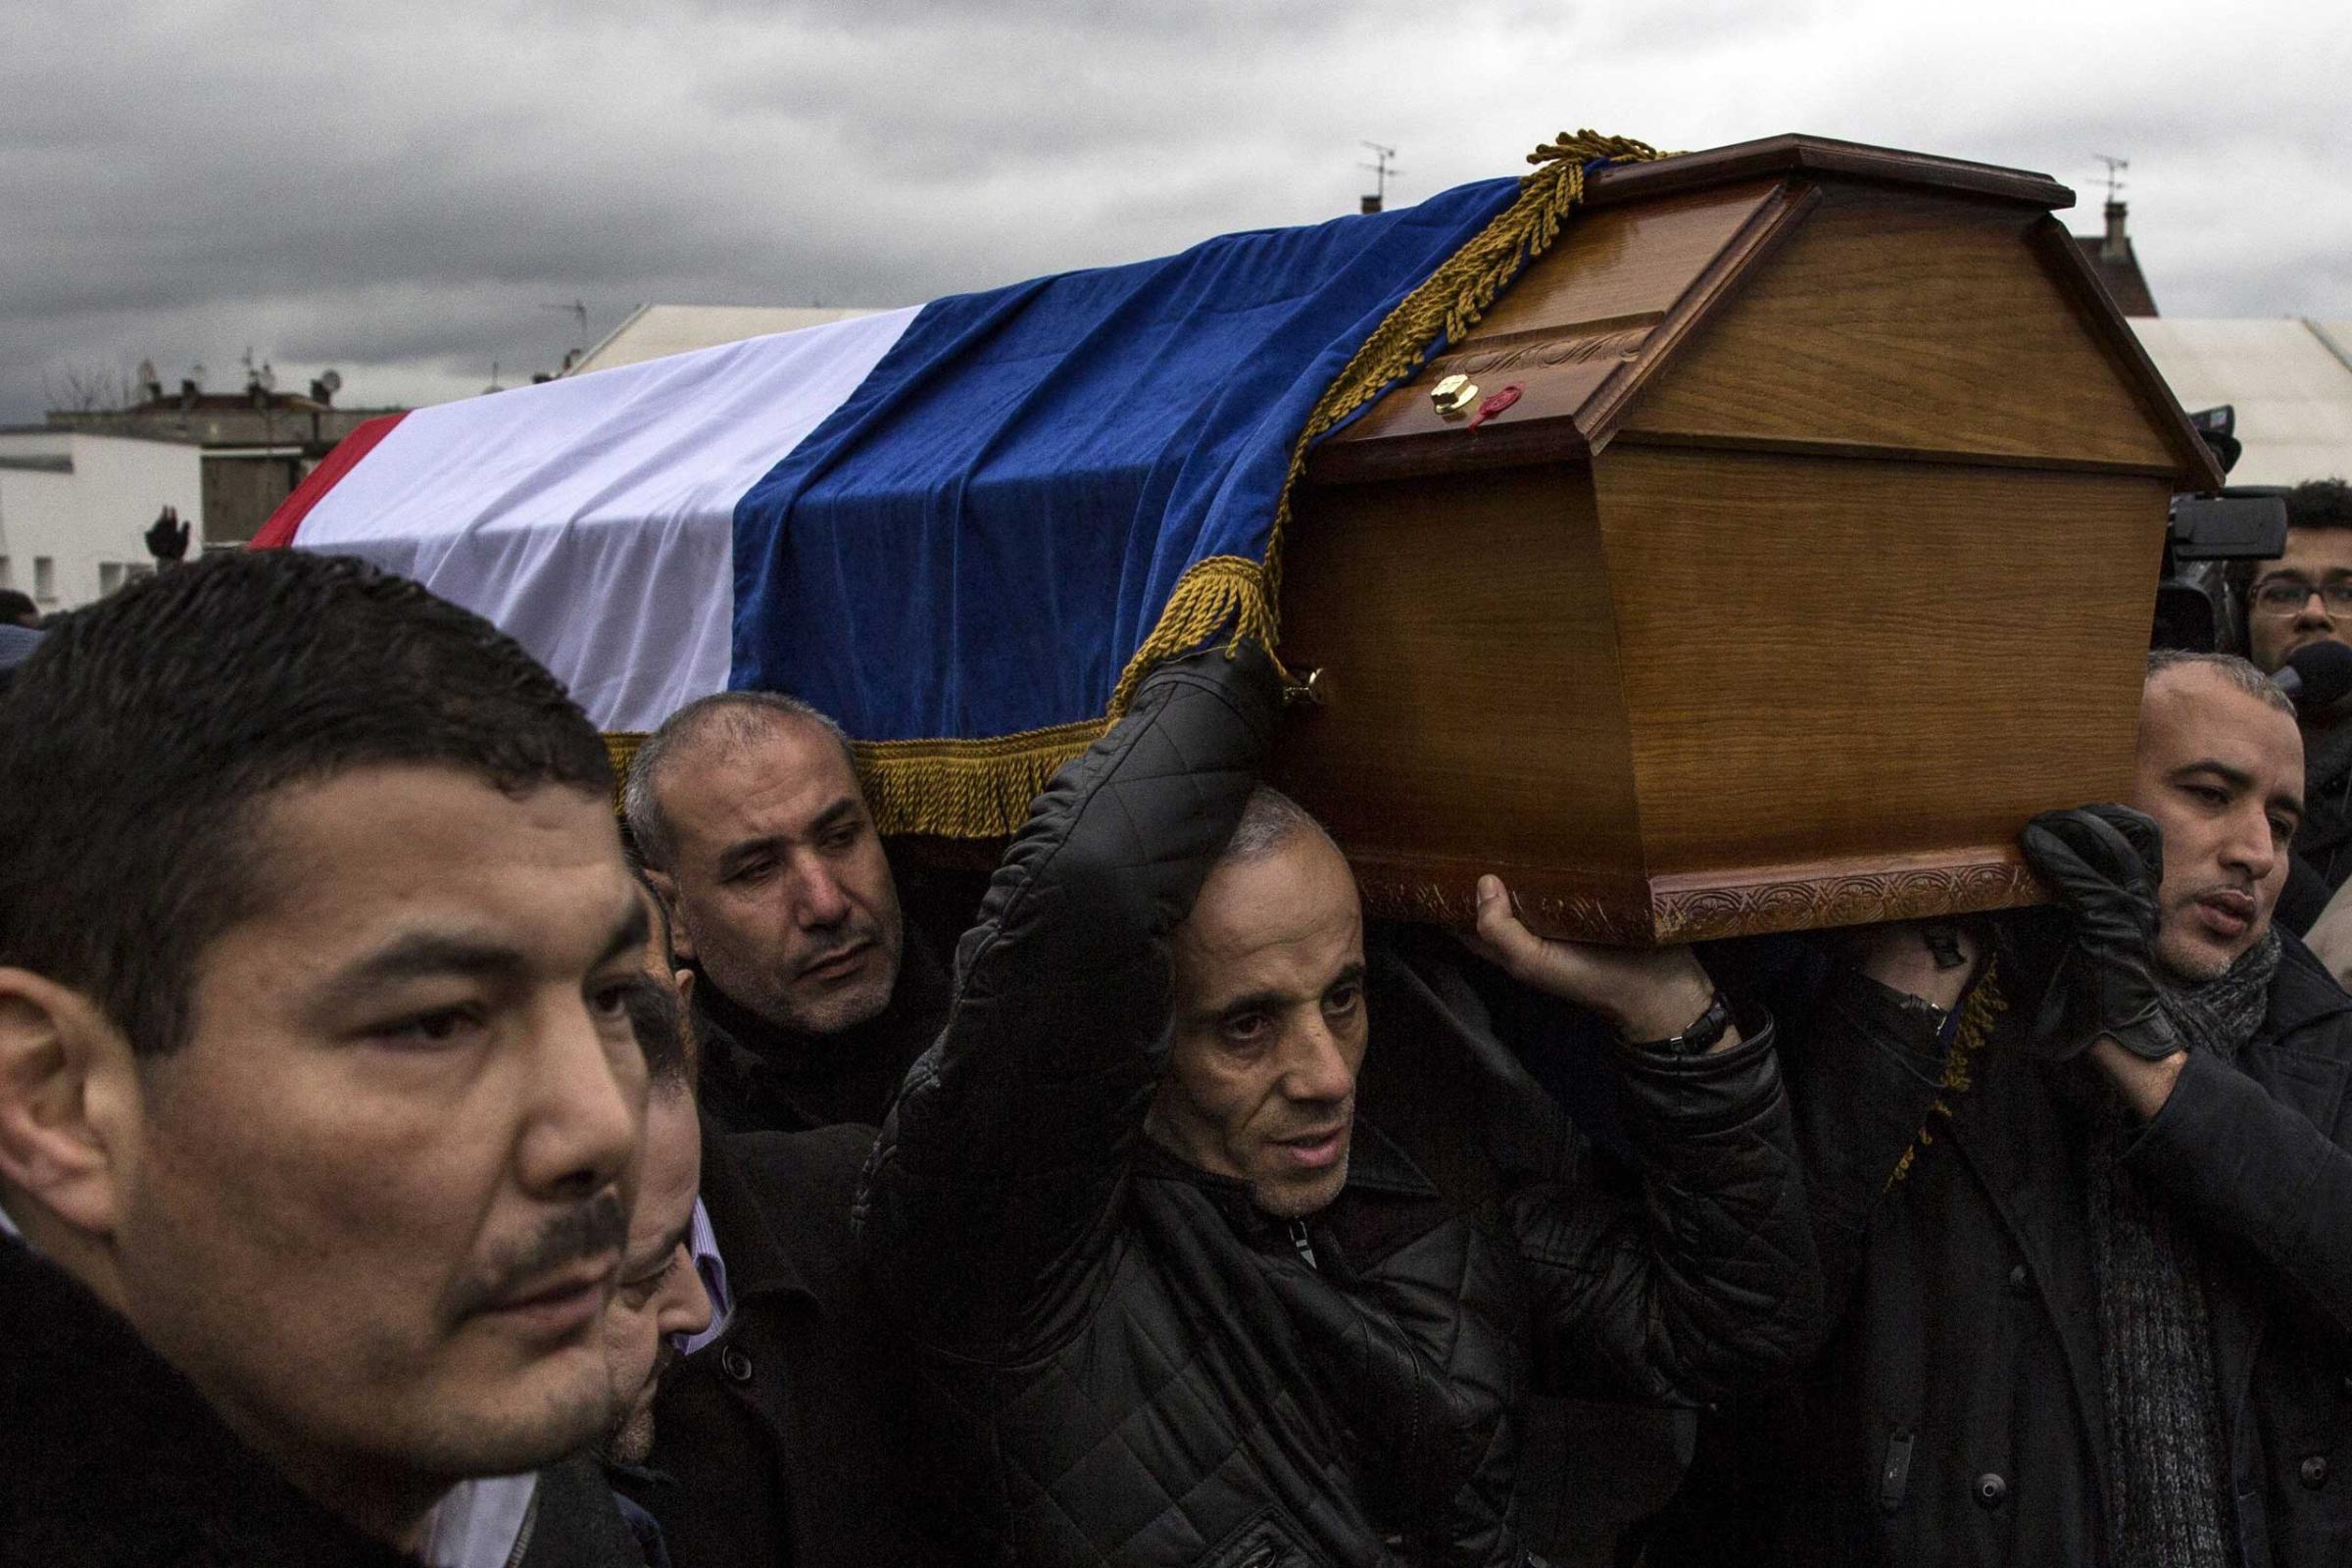 The funeral of murdered police officer Ahmed Merabet takes place at a muslim cemetery on Jan. 13, 2015 in Bobigny, France.